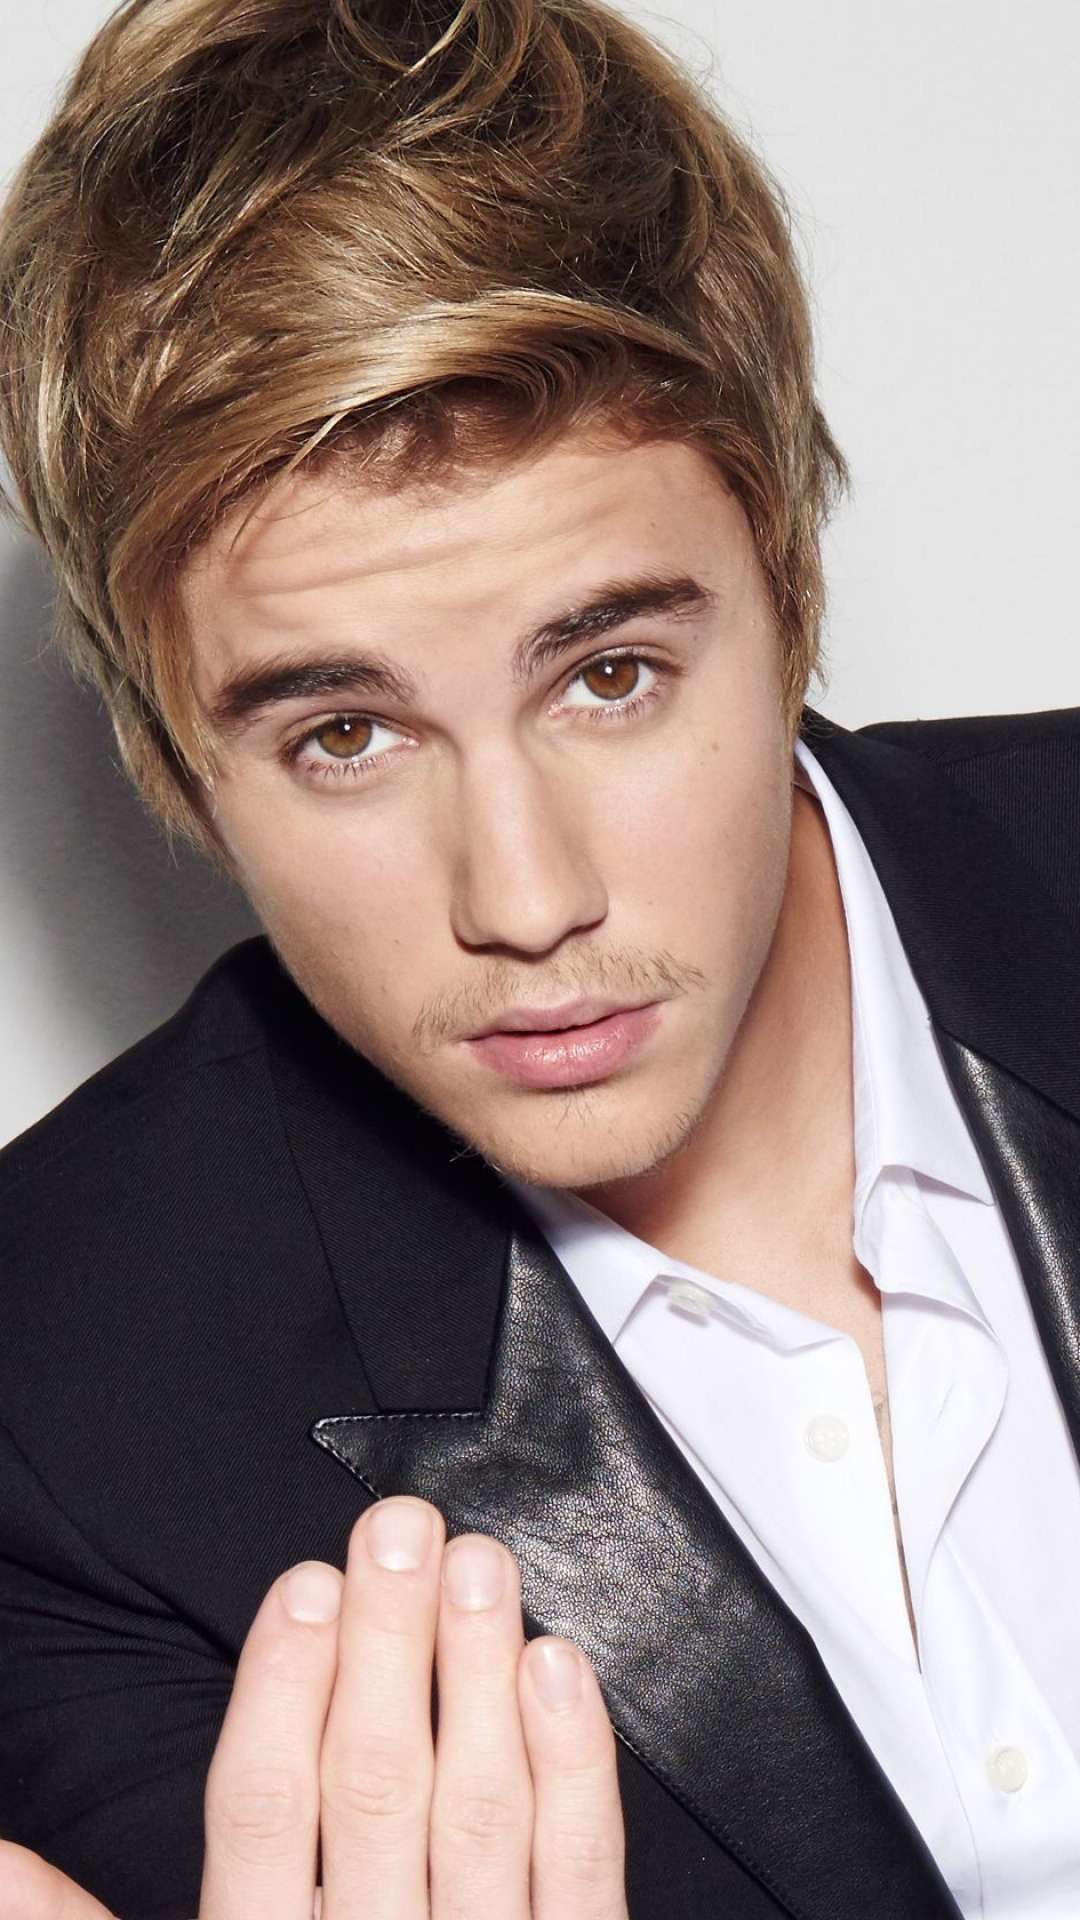 1080x1920 Justin Bieber Pictures for iPhone 6s Plus - HD Images & Wallpapers